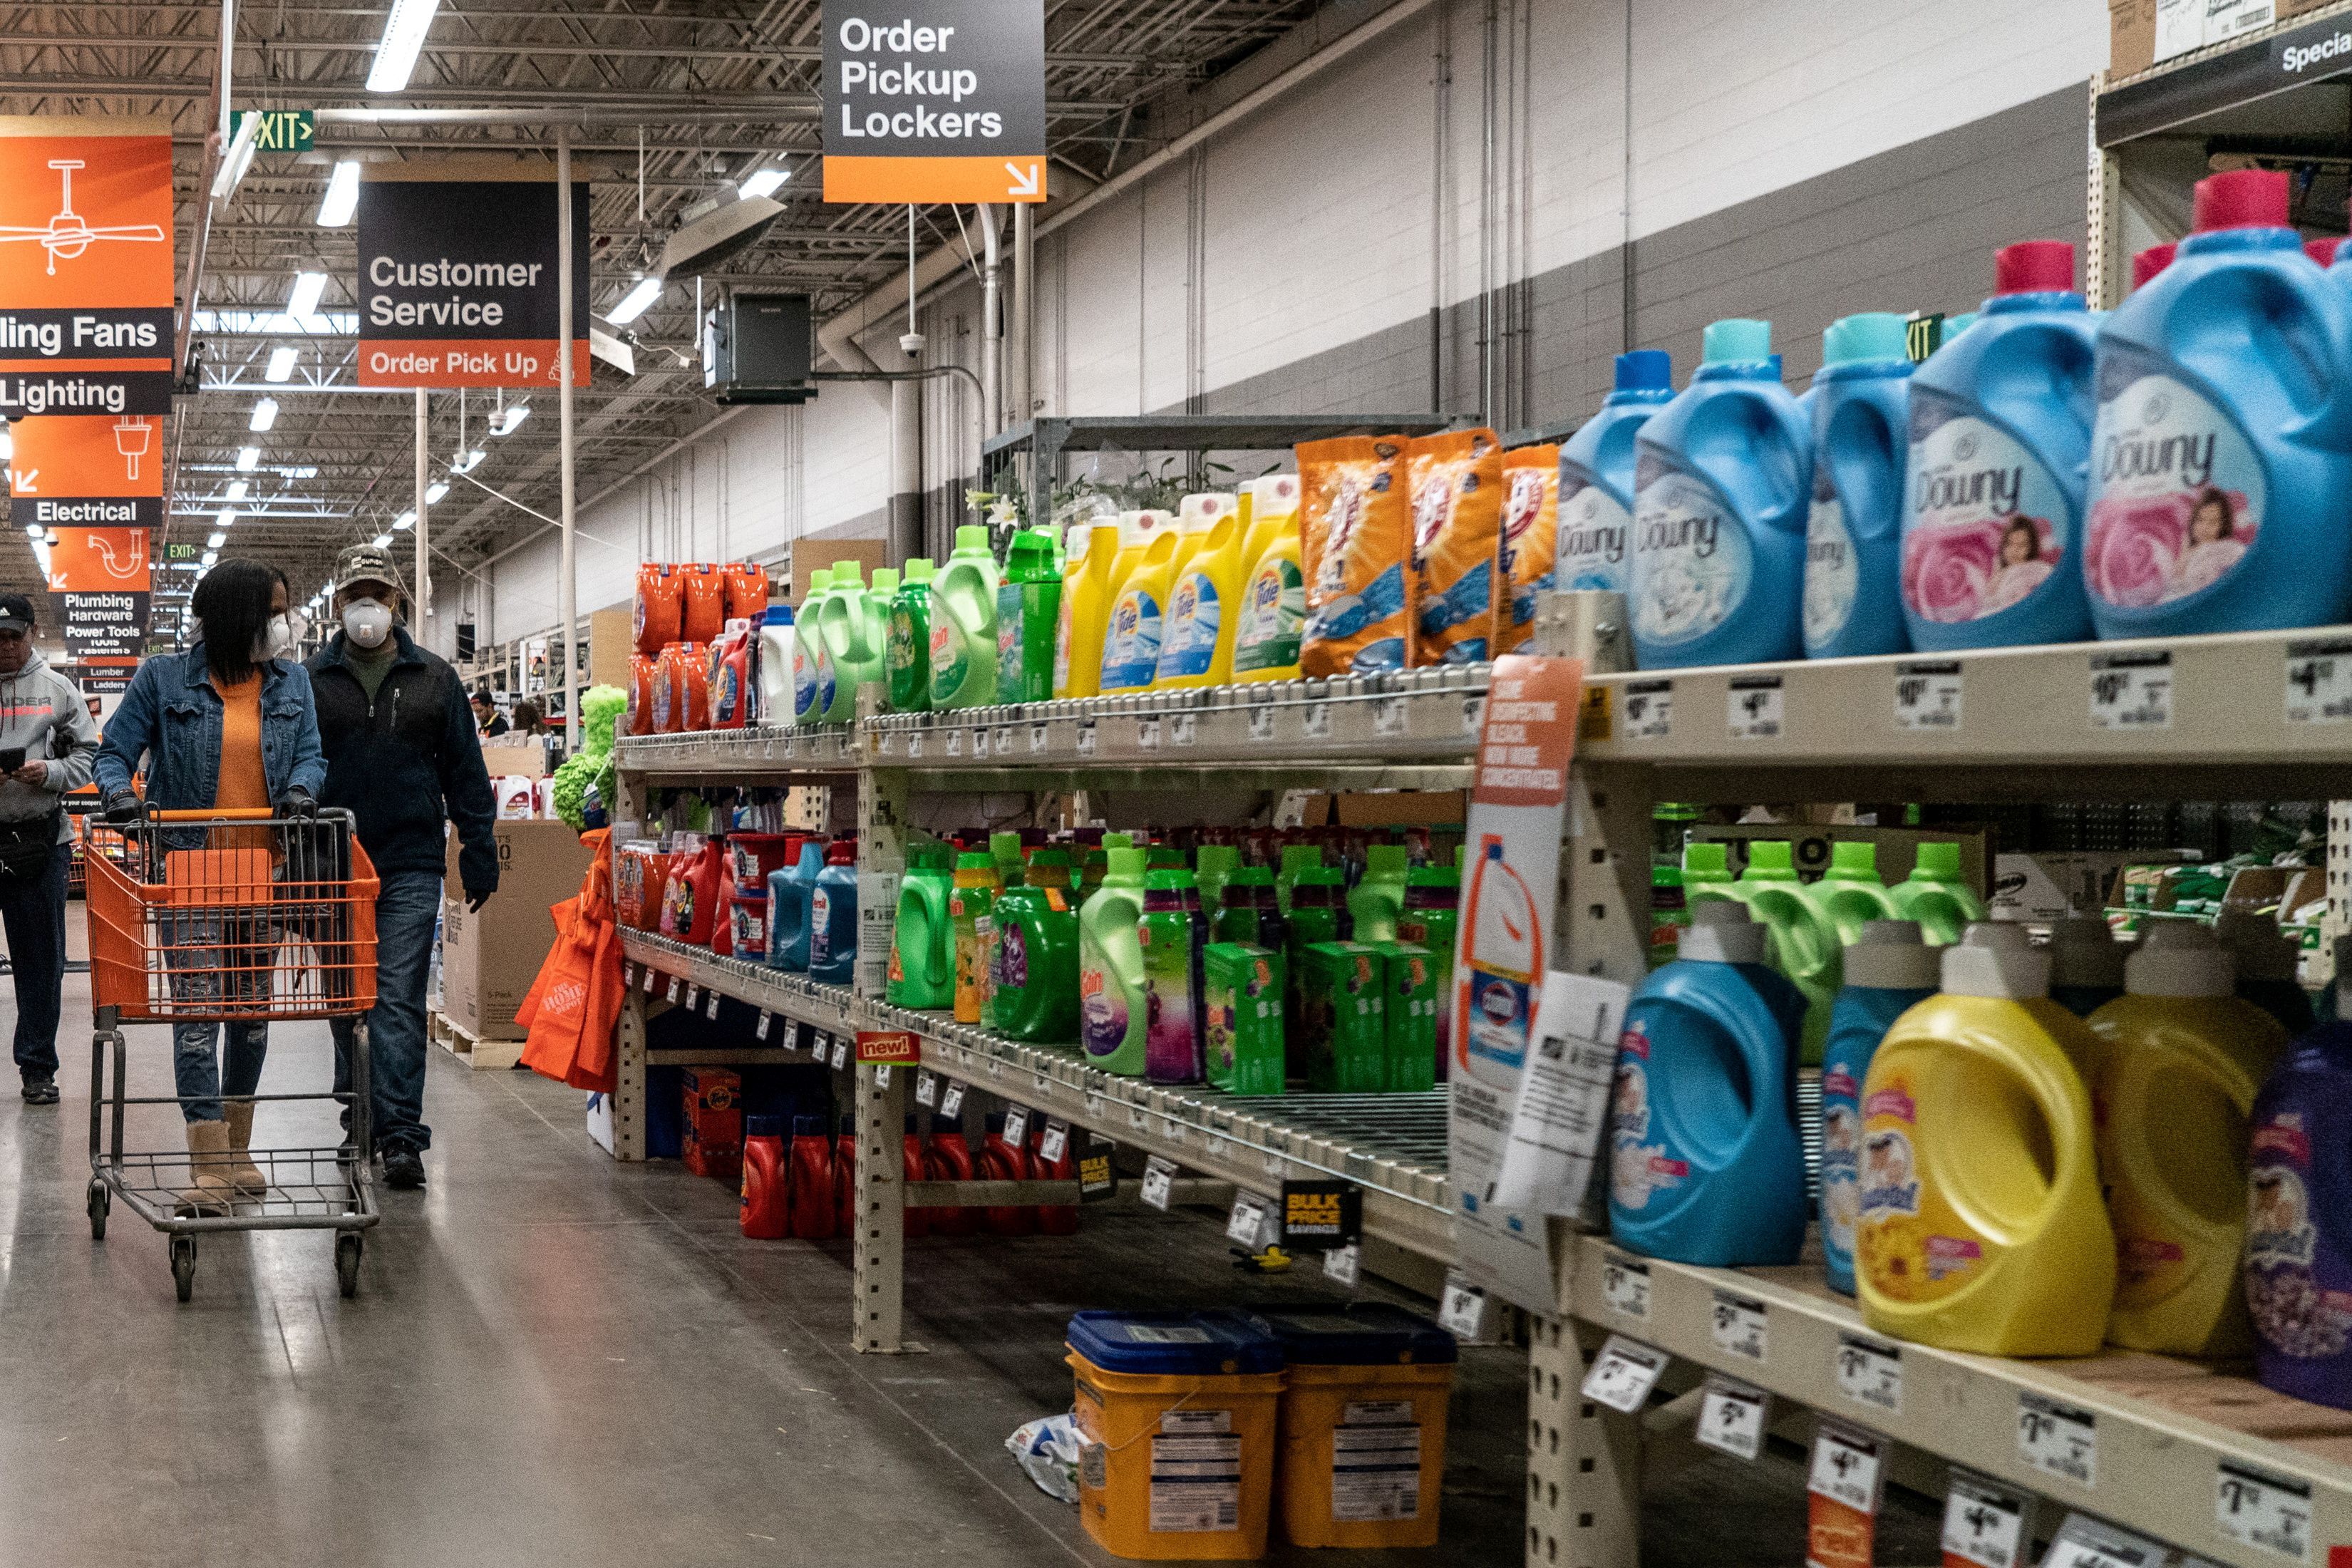 Shoppers browse in a Home Depot building supplies store while wearing masks in St Louis